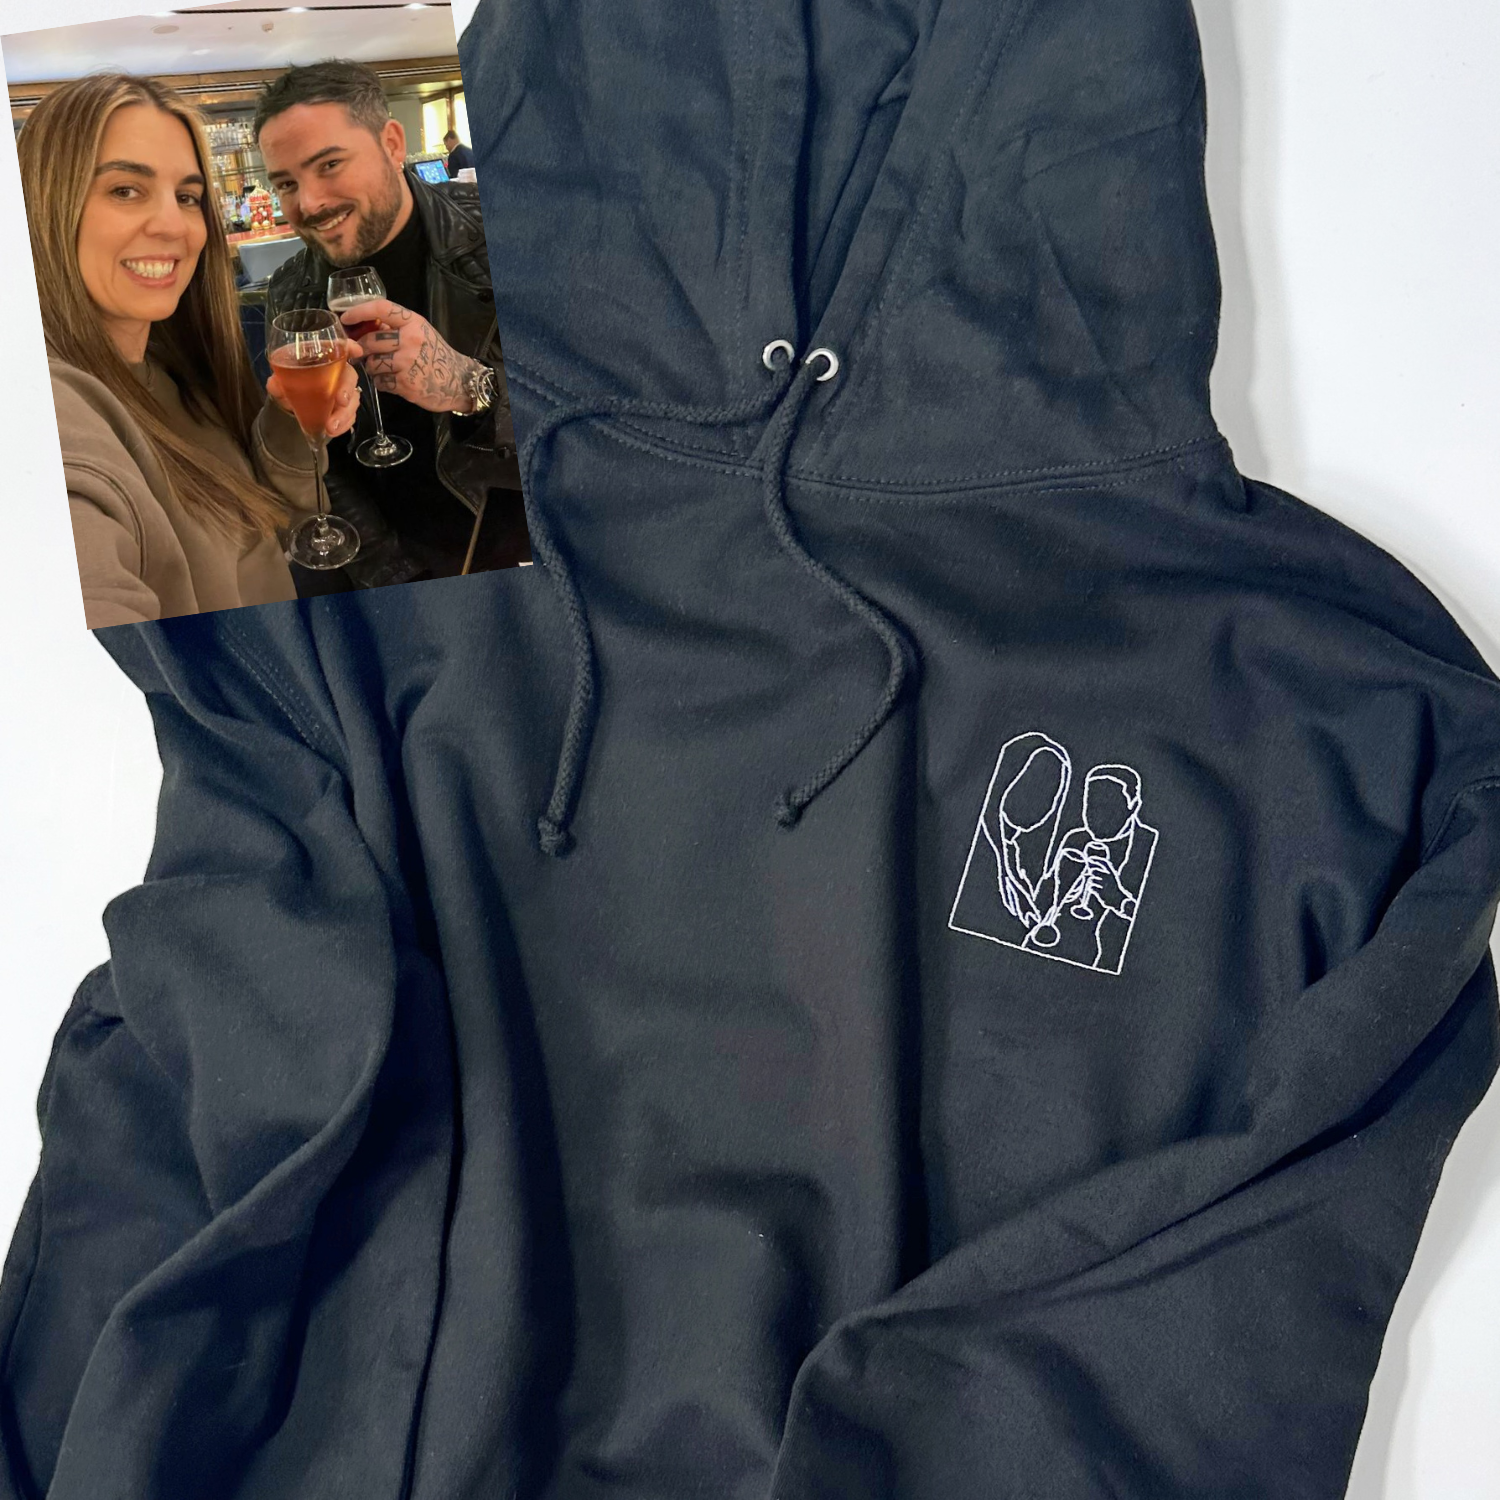 Custom Embroidered Premium Quality Hoodie, Expertly Crafted from Customer's Uploaded Image with Outline Artwork, Showcasing Unique Personalisation and Unmatched Quality